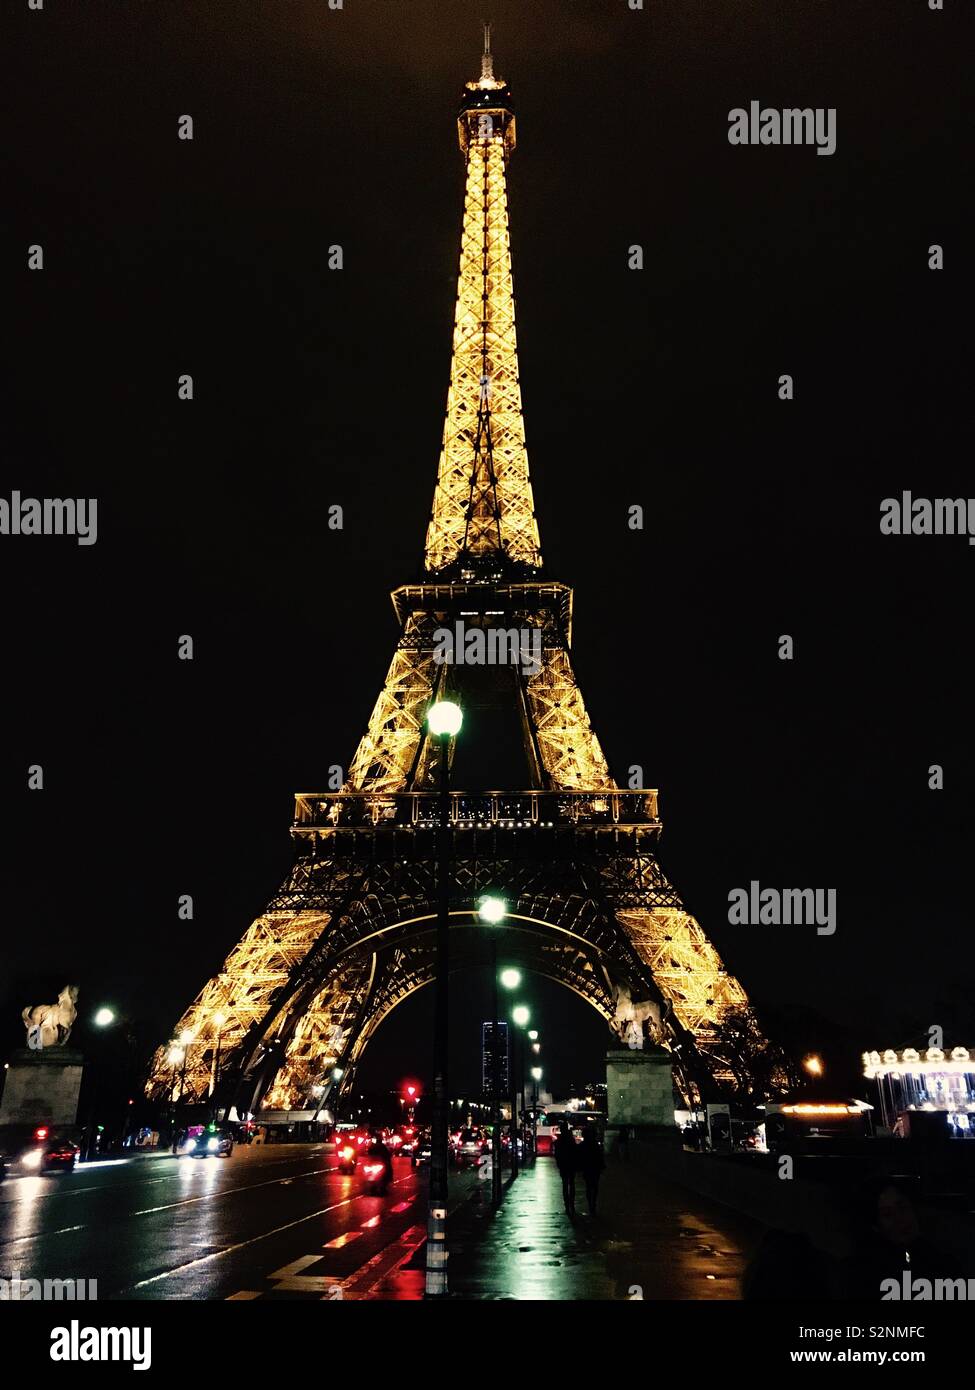 Eiffel Tower lighted up in a rainy night Stock Photo